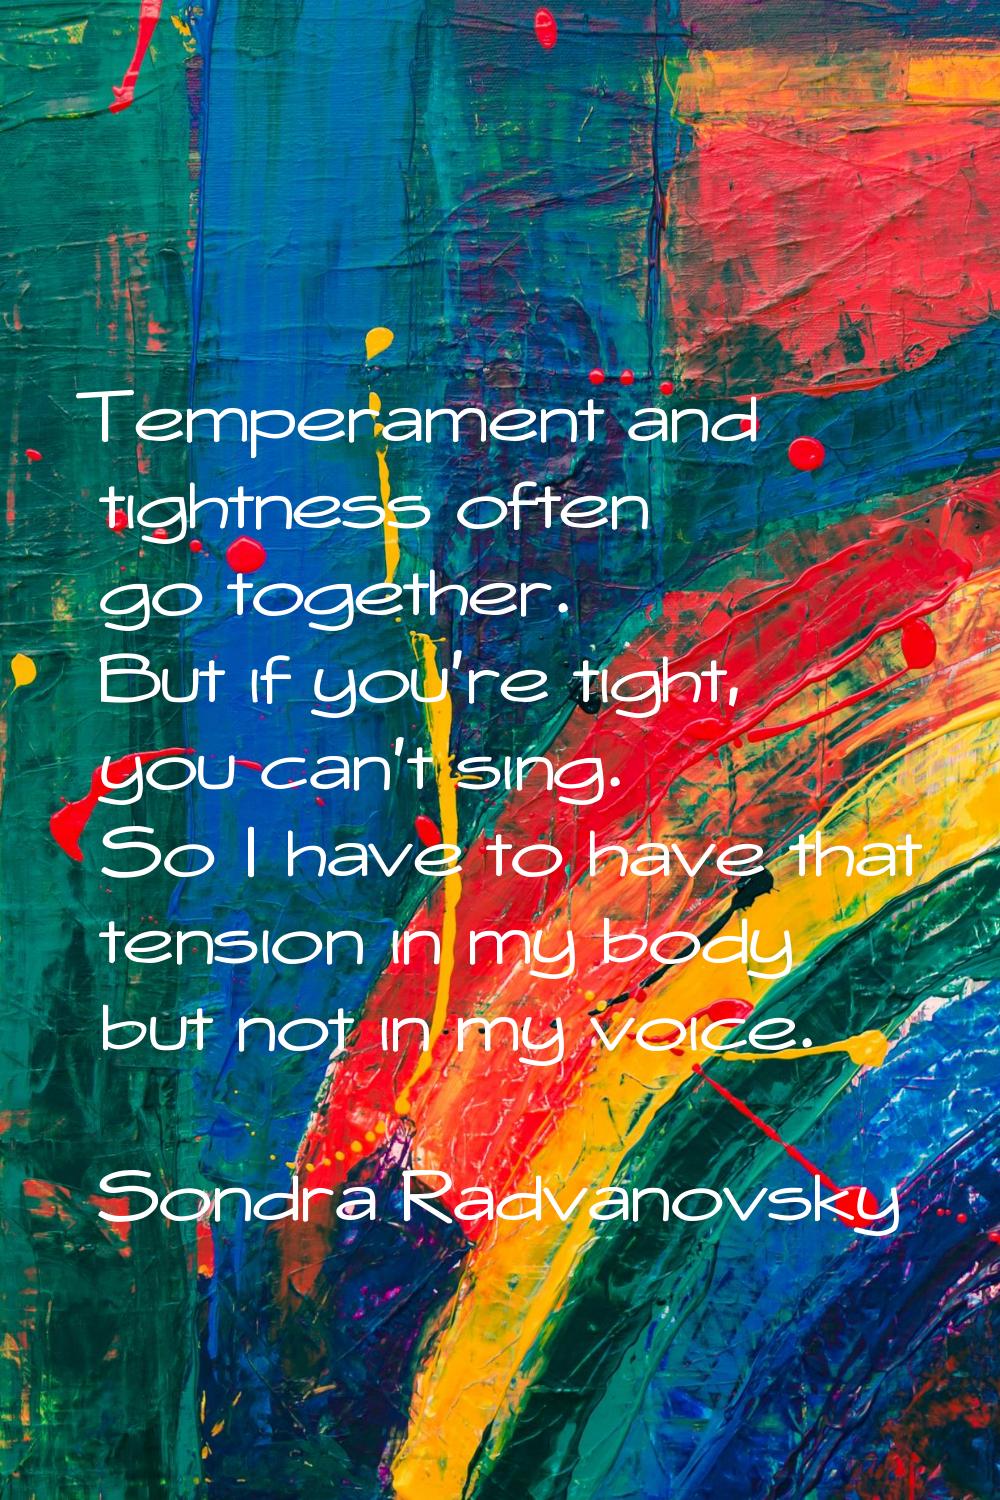 Temperament and tightness often go together. But if you're tight, you can't sing. So I have to have